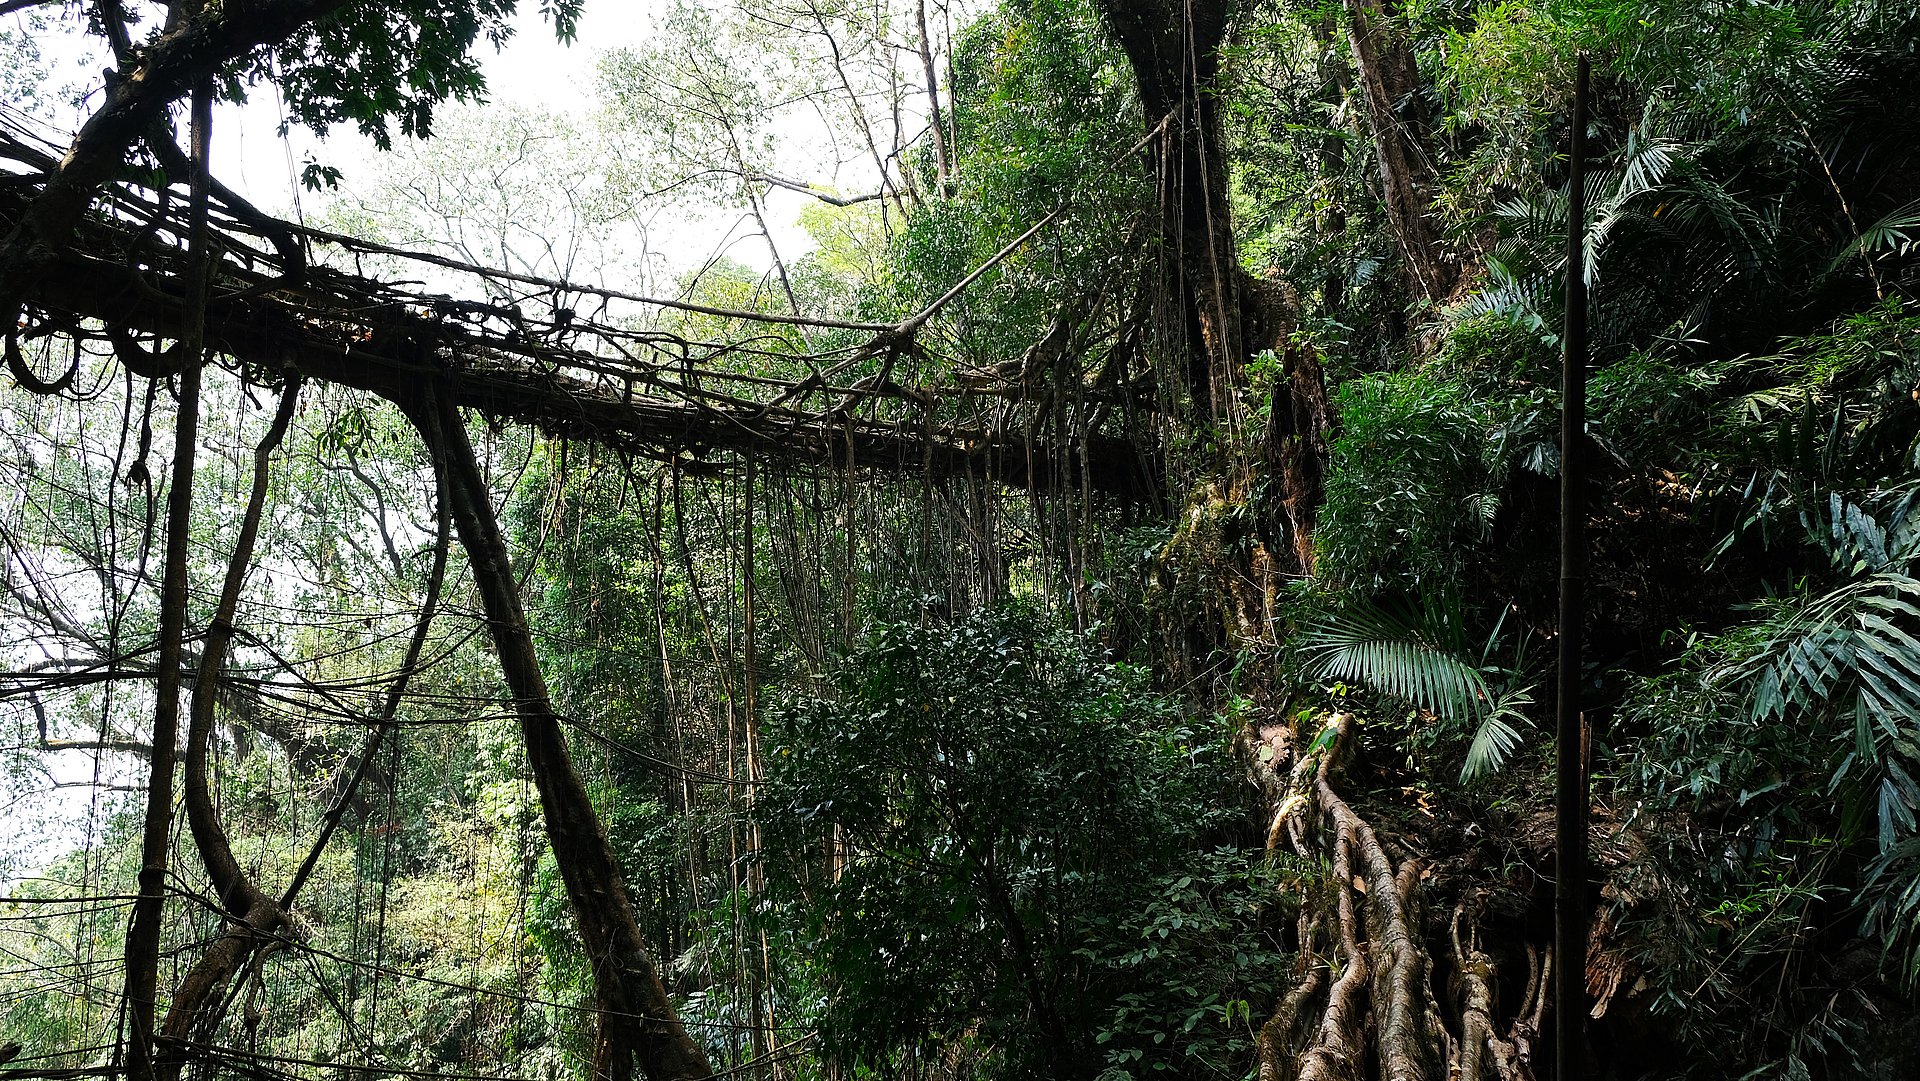 The so-called Meghalaya bridges often lead over steep valleys. Many are secured by railings and handrails also made from the aerial roots.